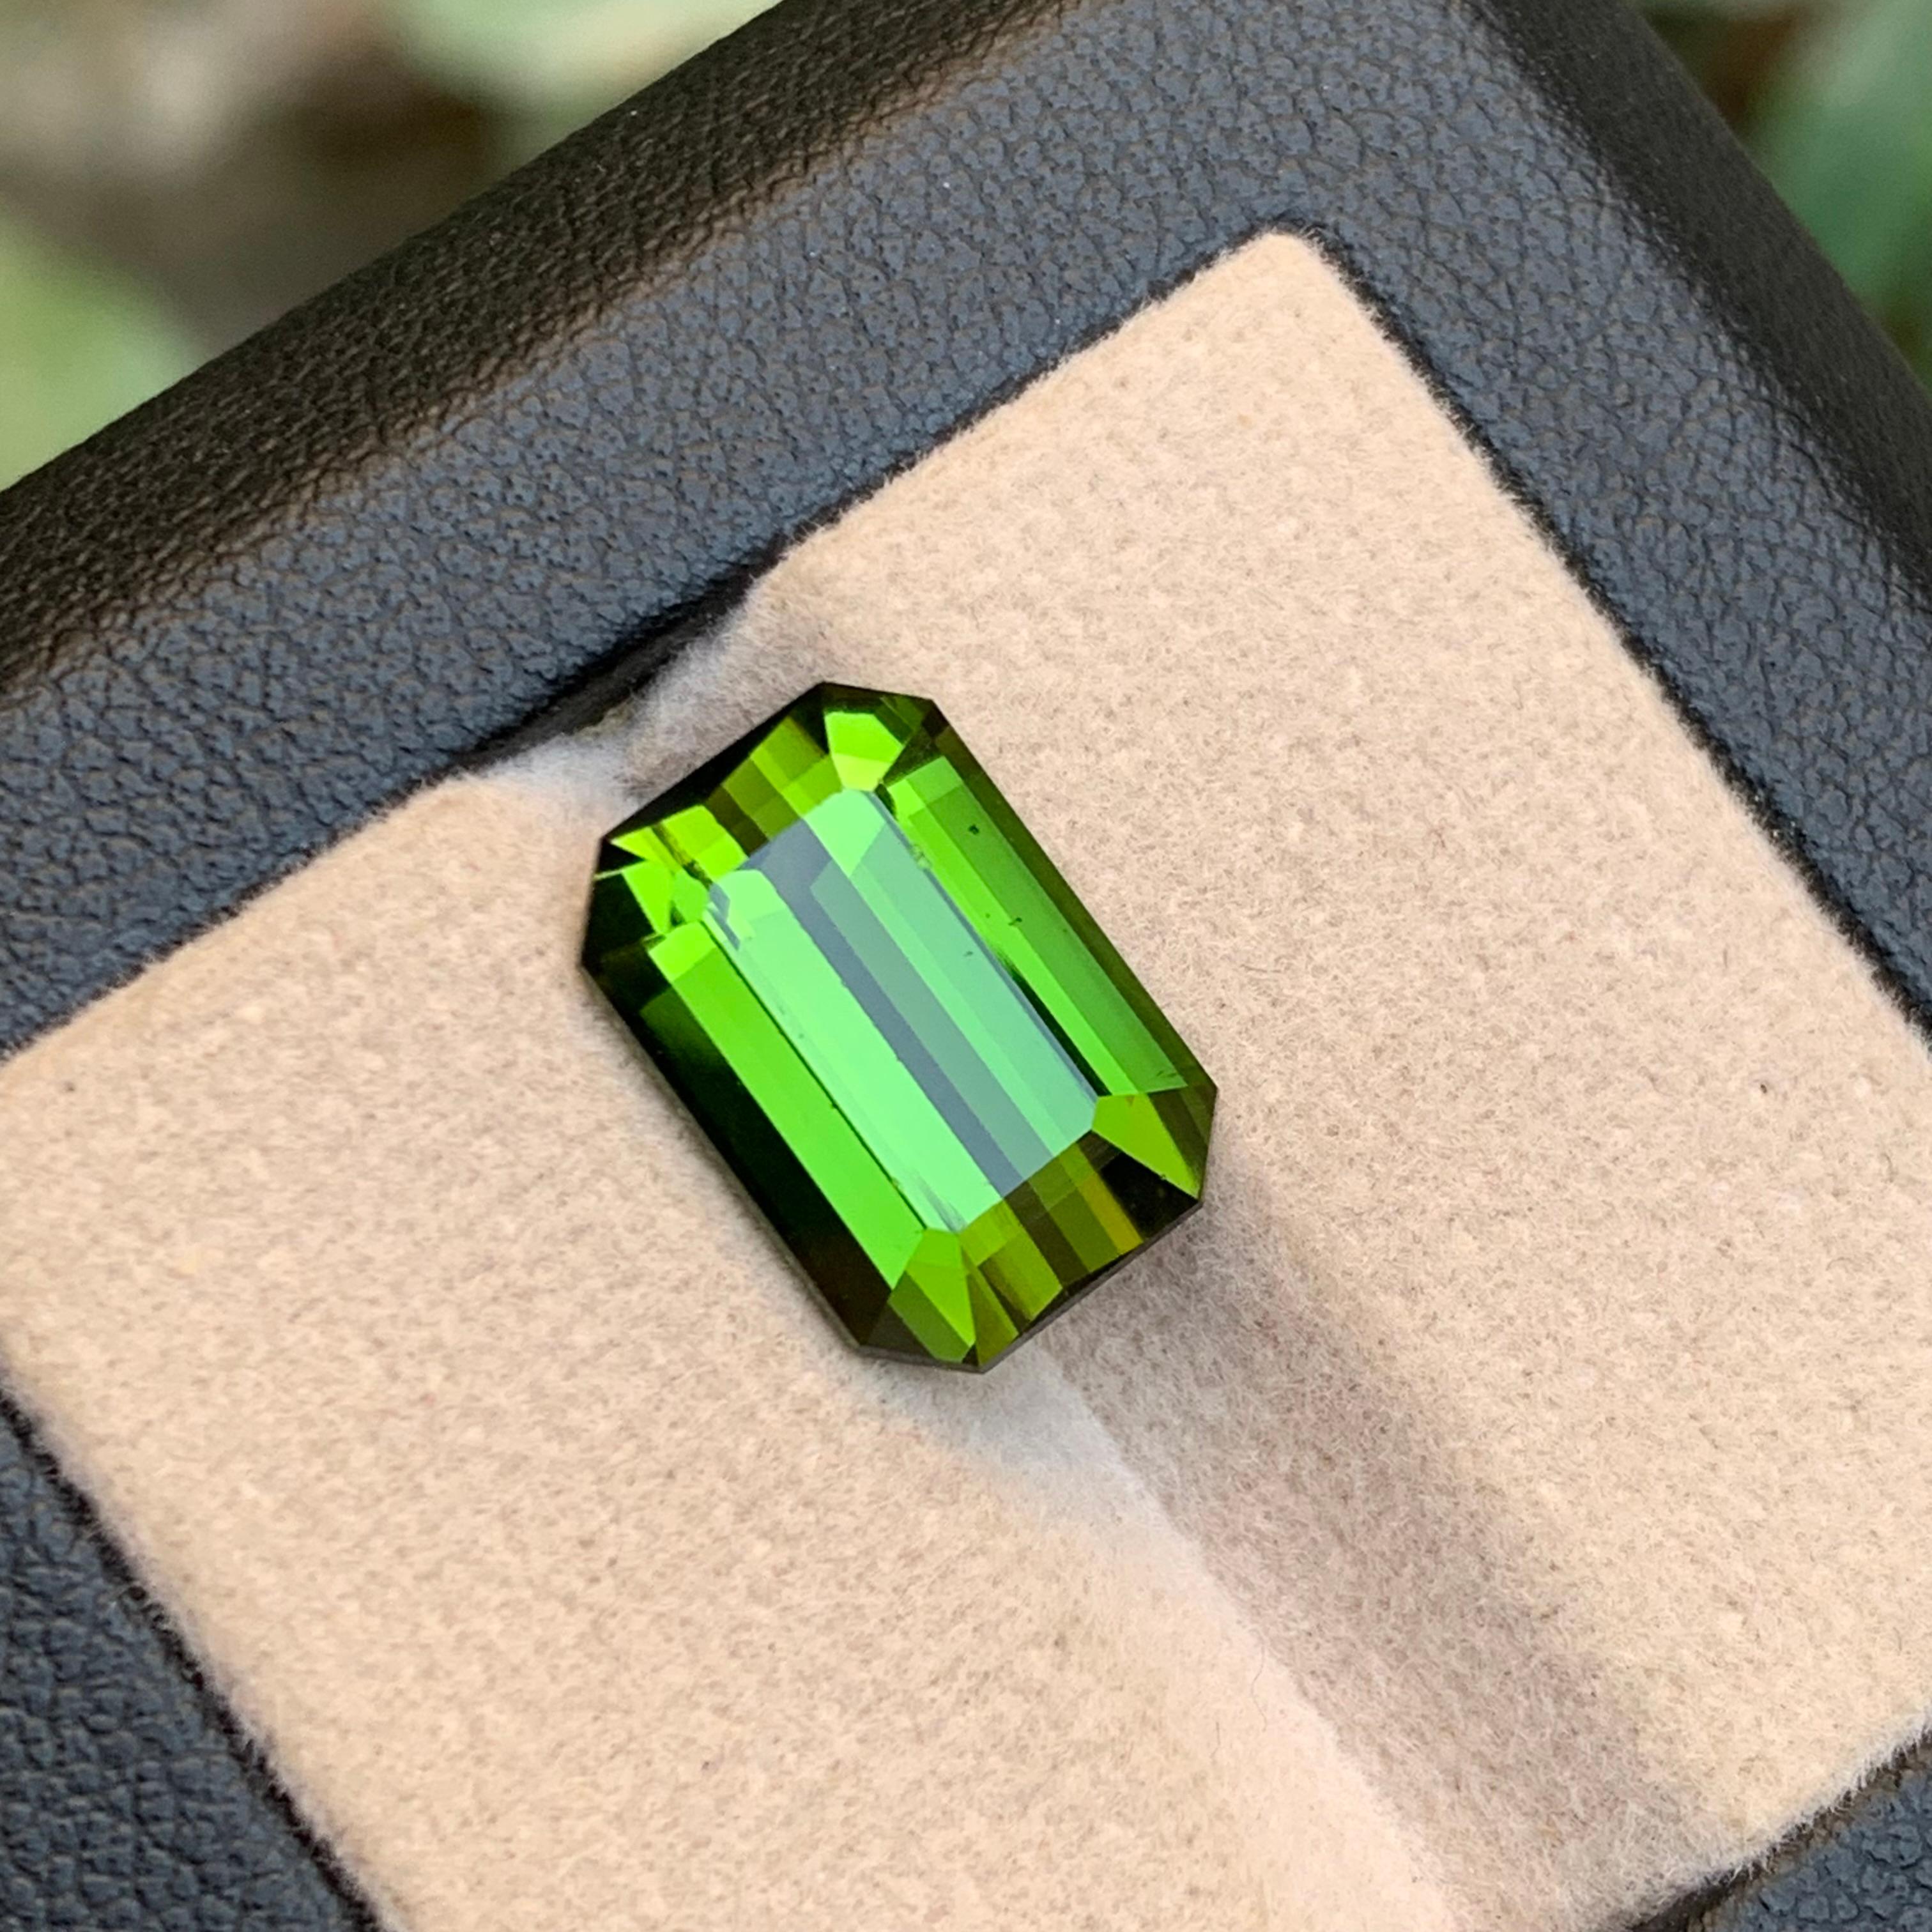 Rare Green Natural Tourmaline Loose Gemstone, 7.75 Ct-Emerald Cut Top Quality For Sale 3